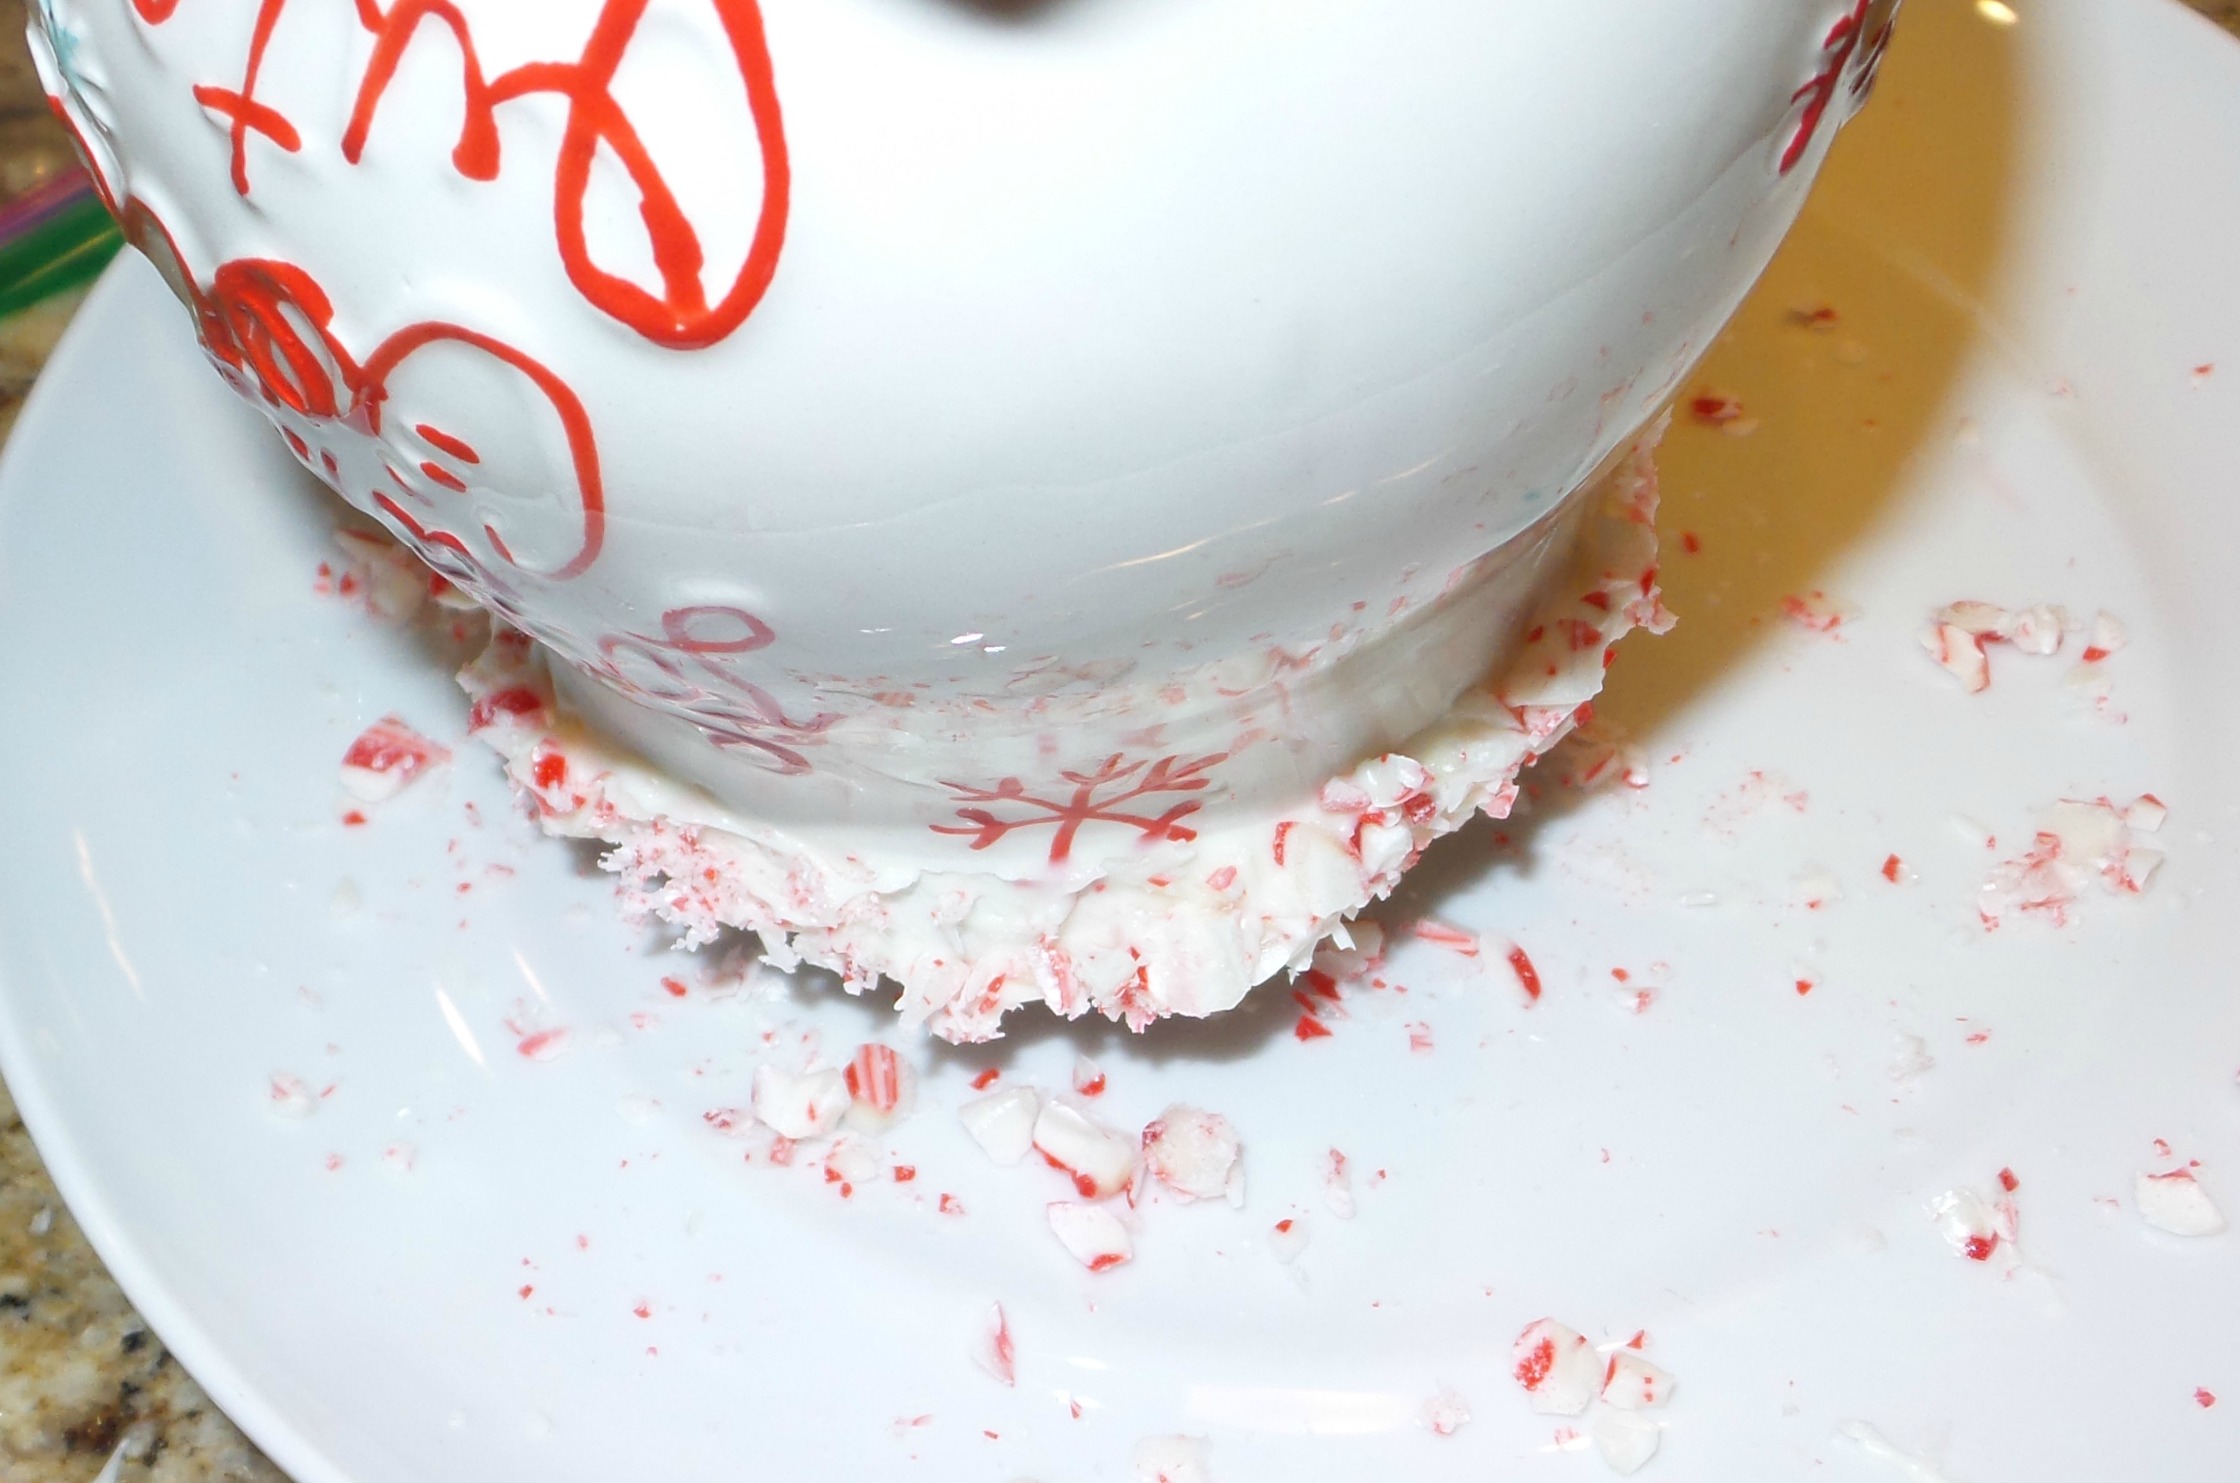 candy cane rimmed cup